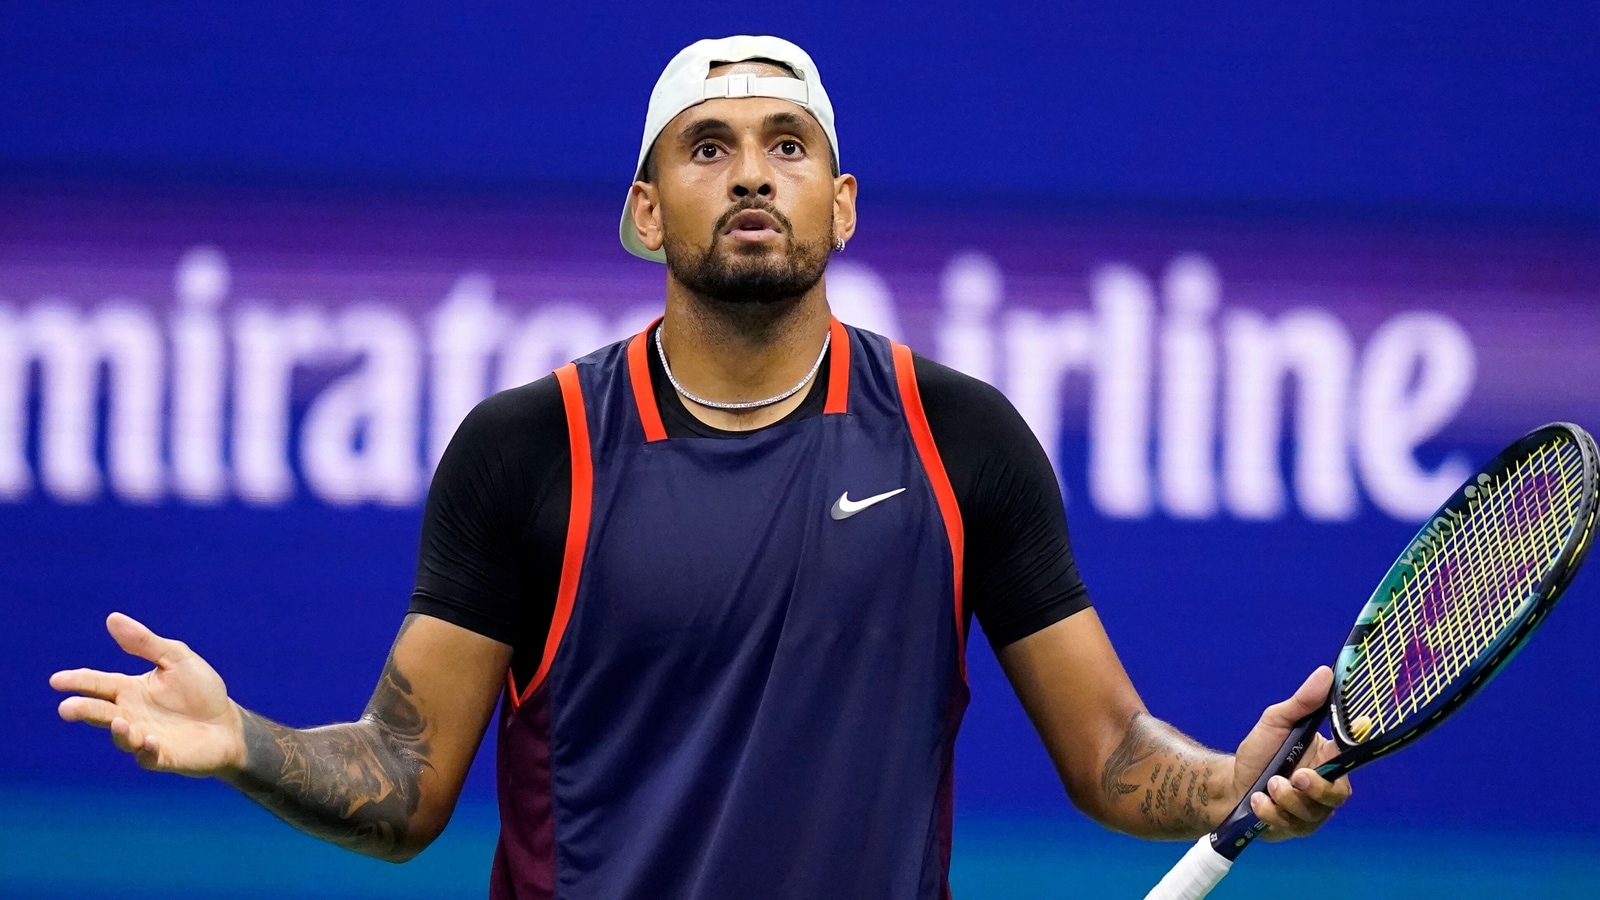 nick-kyrgios-seeking-to-have-assault-charge-dismissed-on-mental-health-grounds